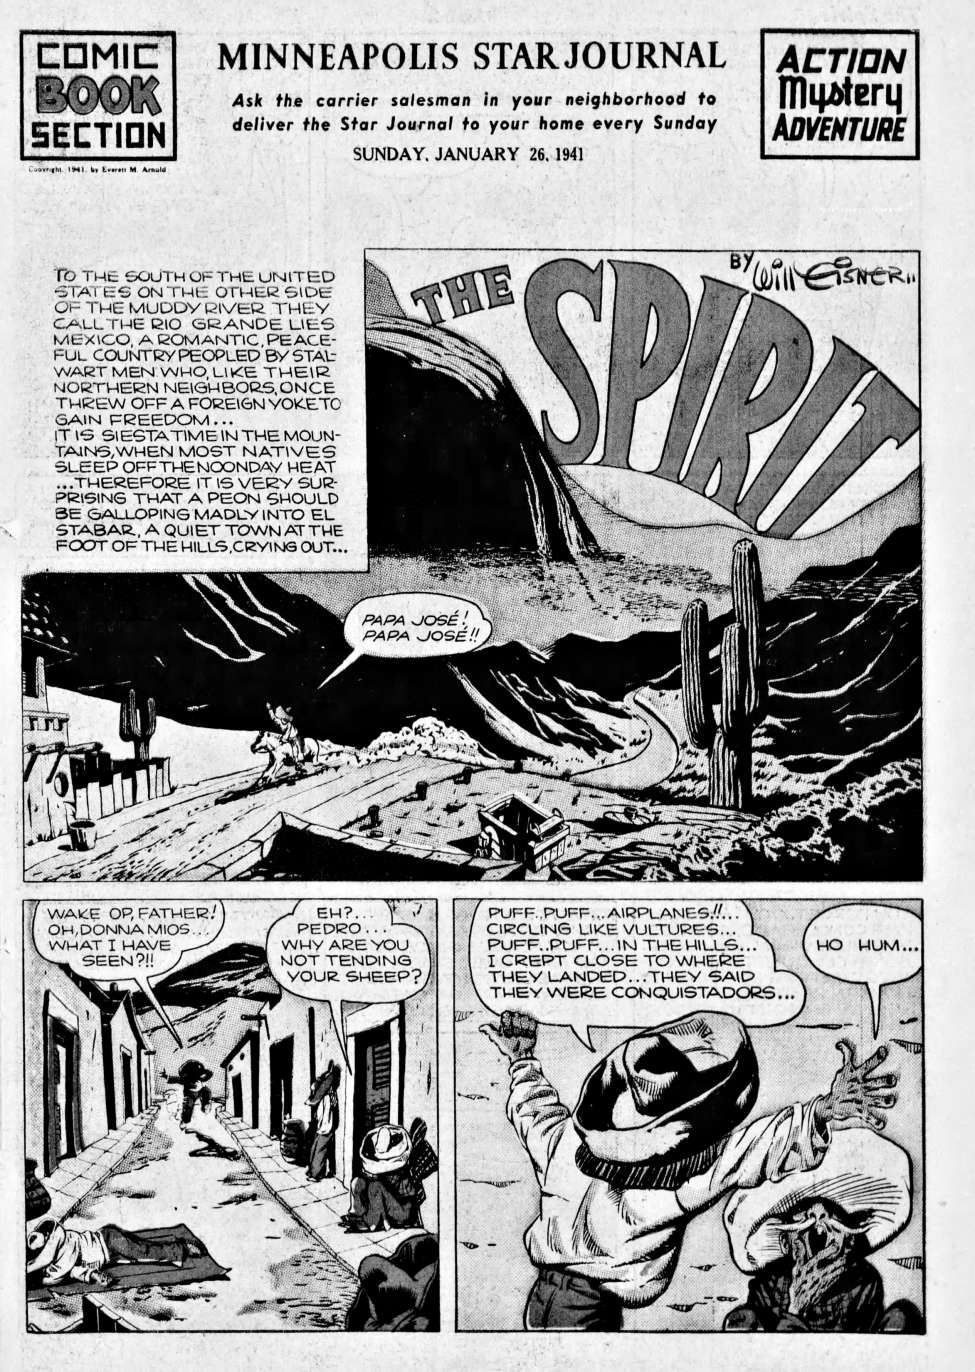 Book Cover For The Spirit (1941-01-26) - Minneapolis Star Journal (b/w)